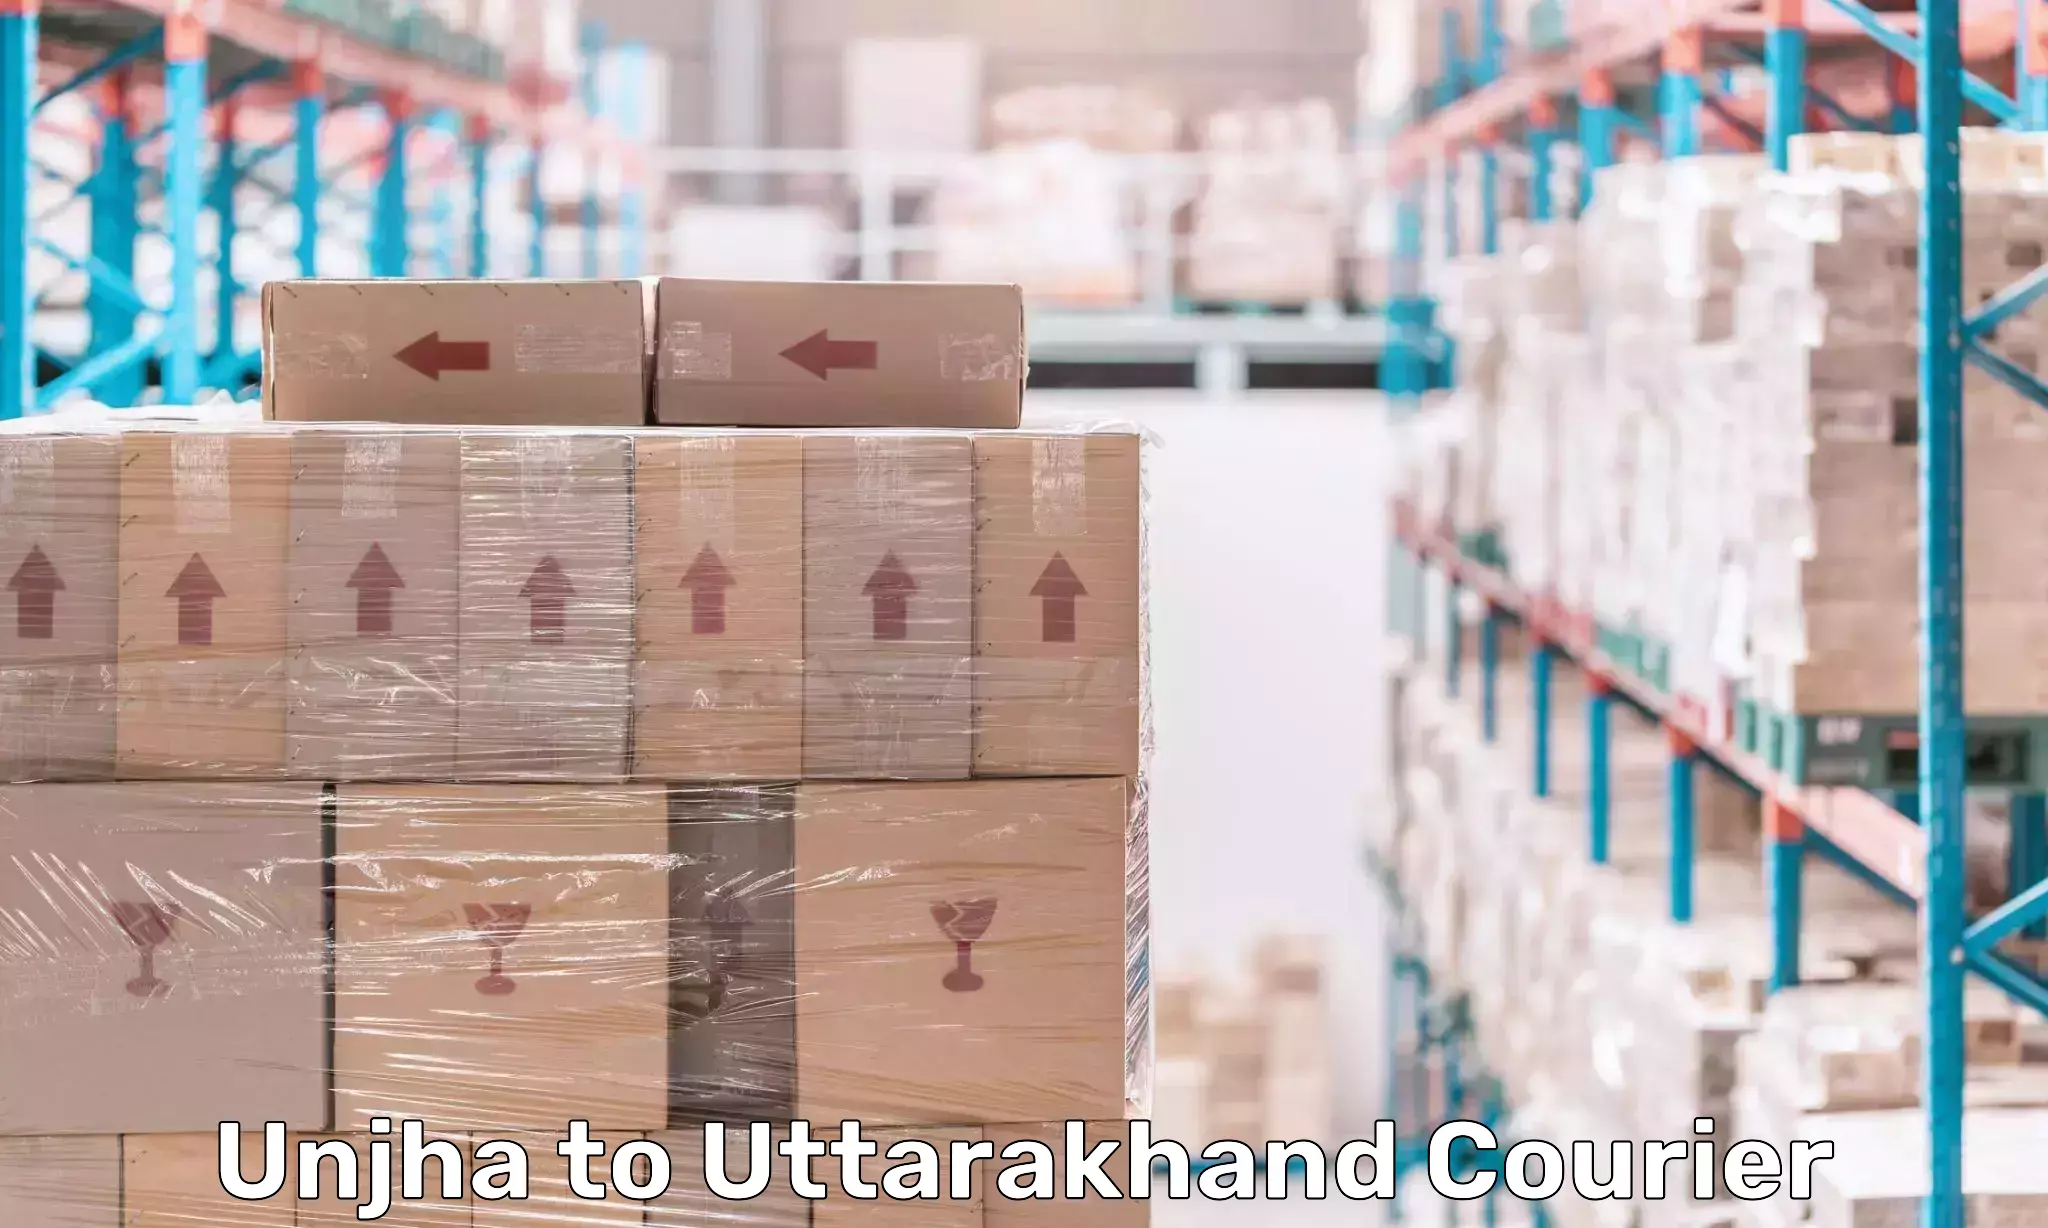 Parcel service for businesses in Unjha to Uttarakhand